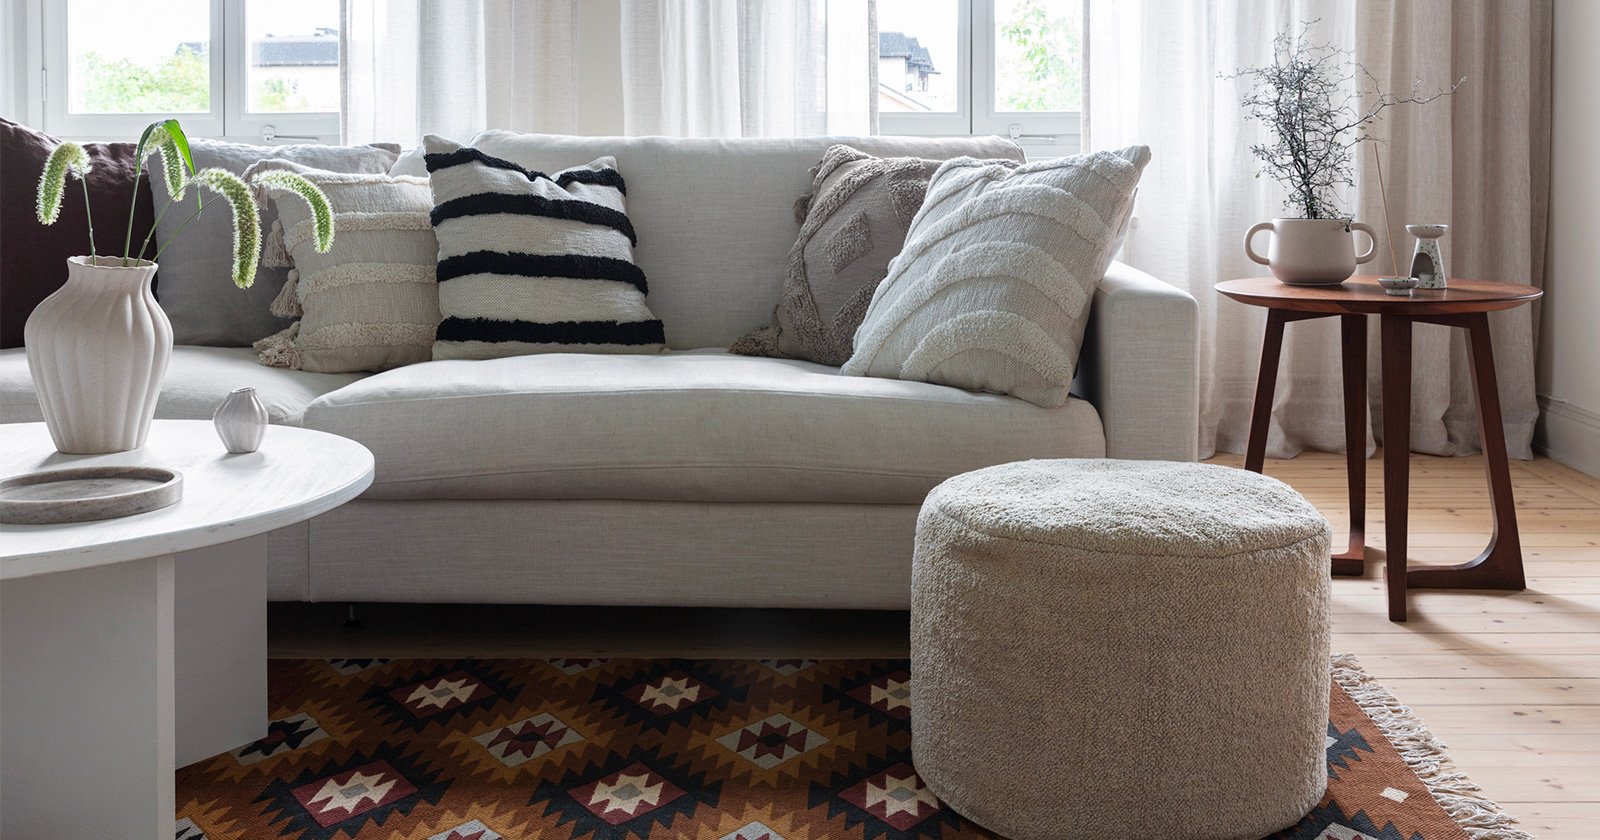 A livingroom with a white sofa with tufted cushions, colourful and patterned rug with a pouf on it